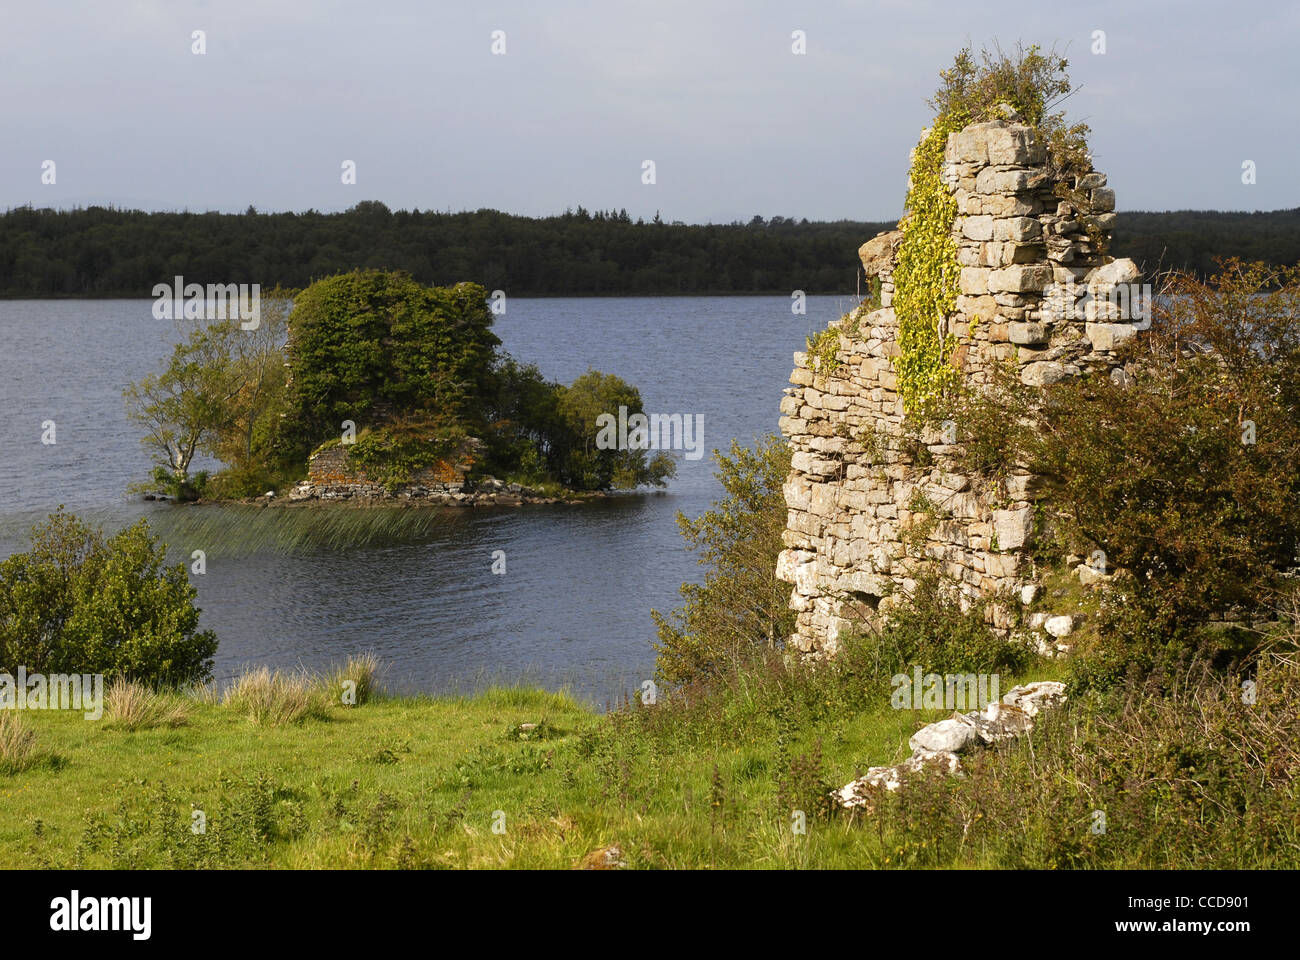 Remains of Rosclogher Castle, Lough Melvin, County Leitrim, Connacht, Ireland, Europe. Stock Photo